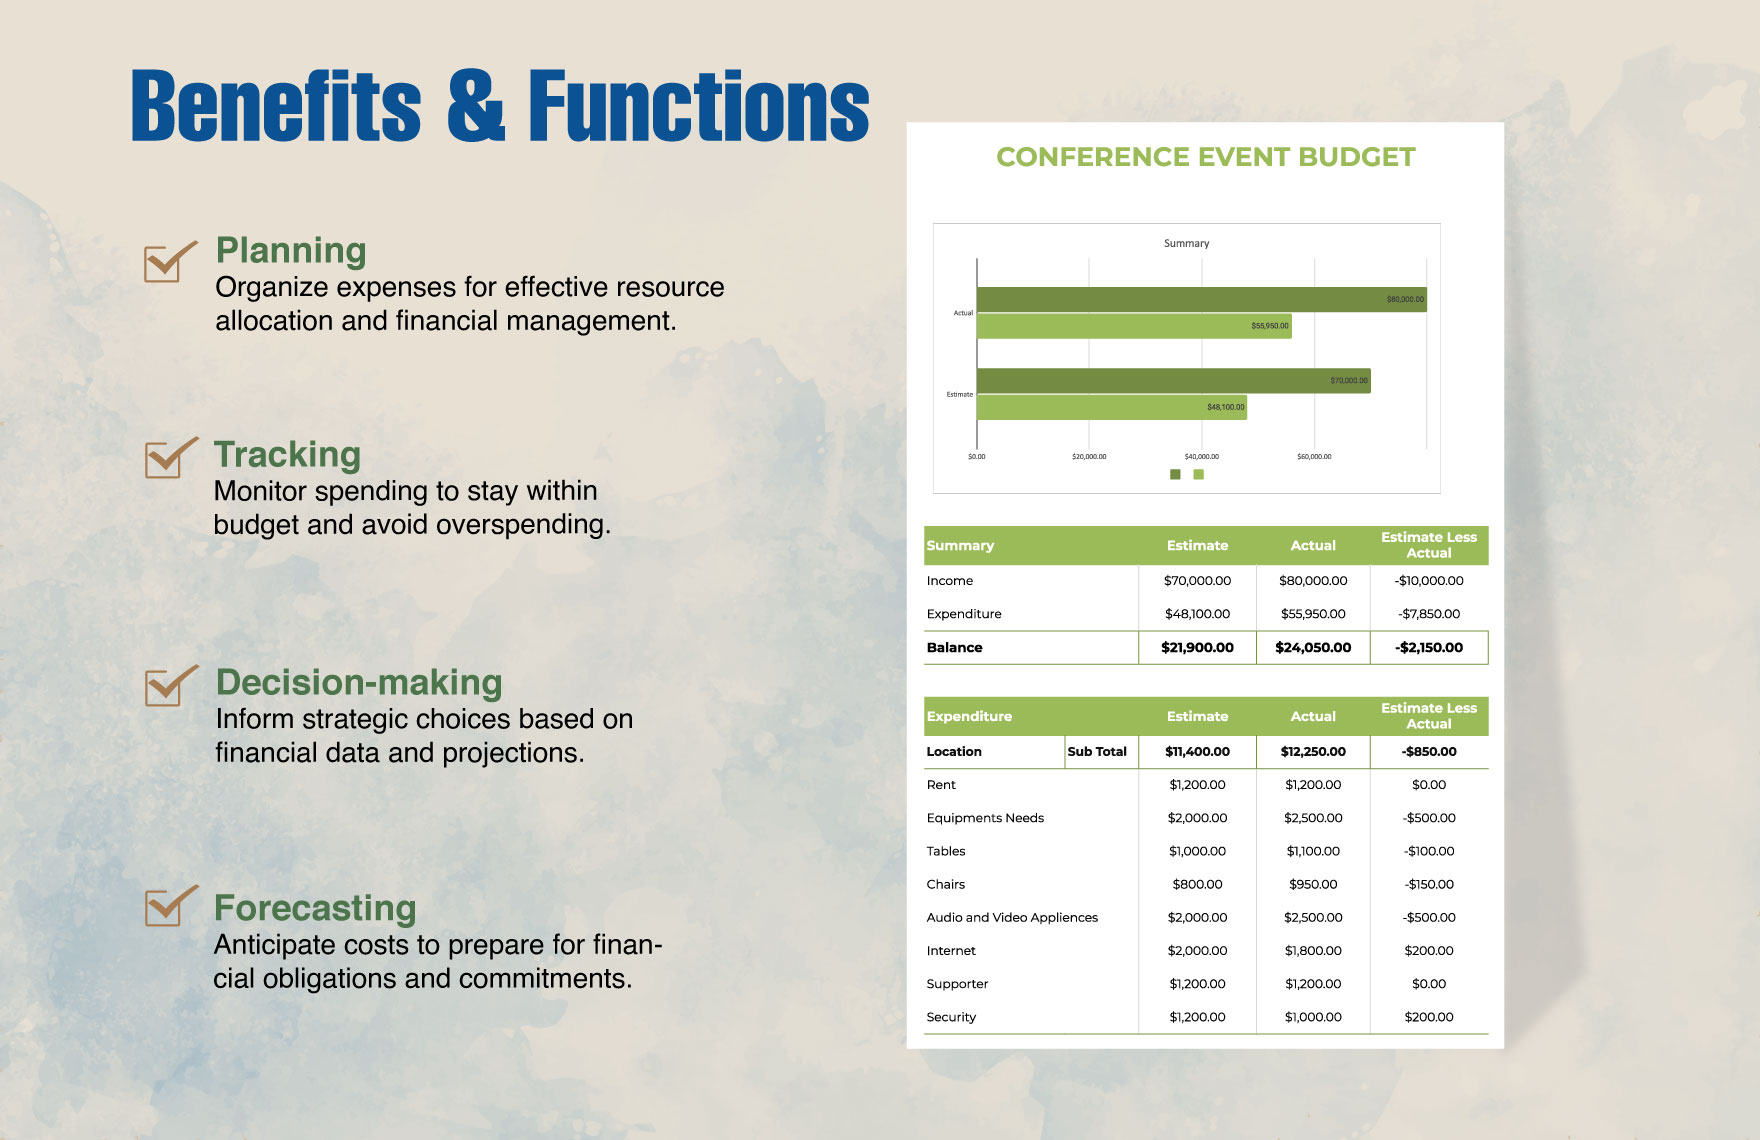 Conference Event Budget Template